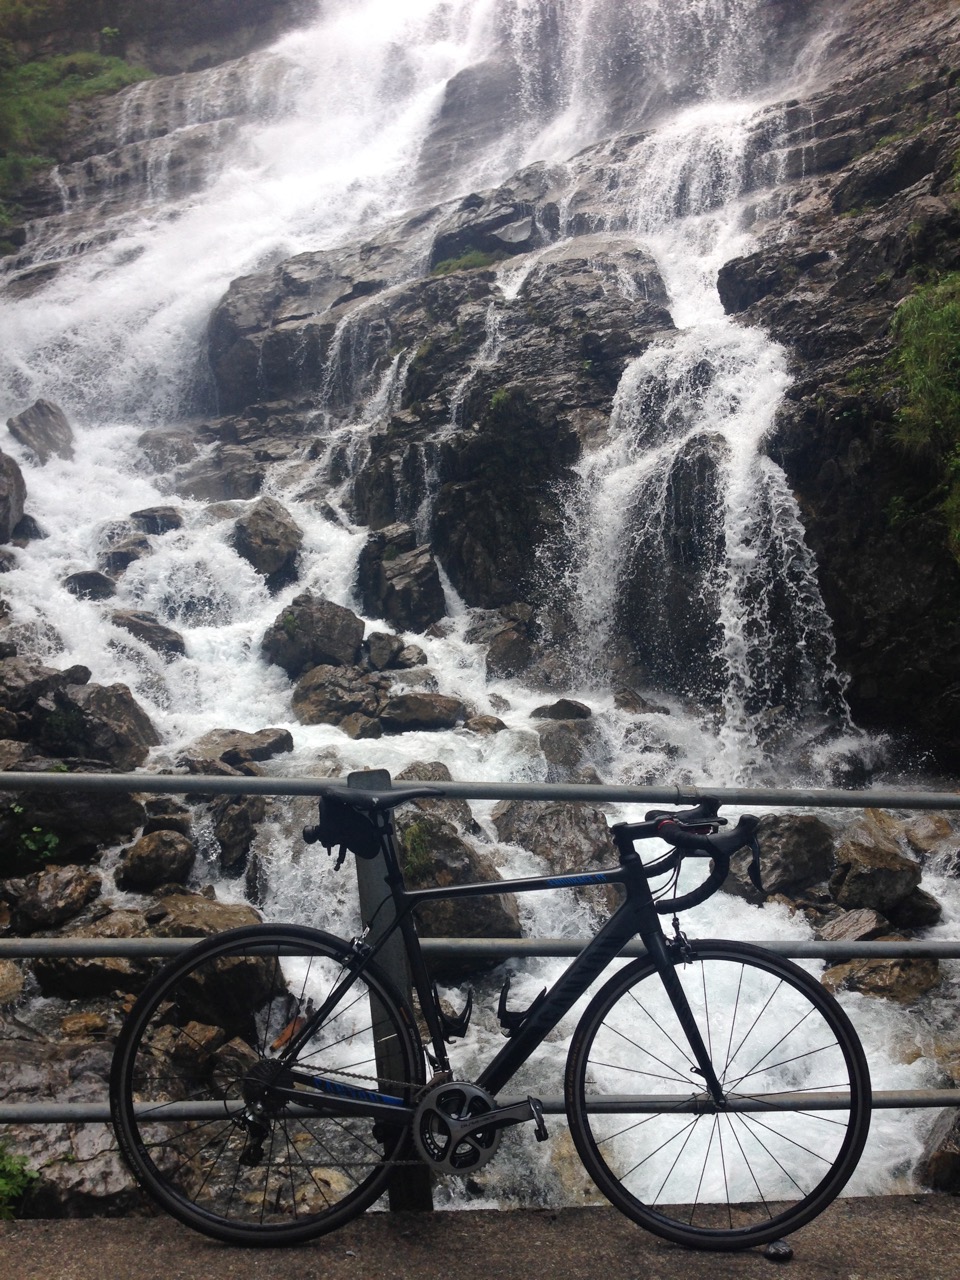 Picture of waterfall and bike